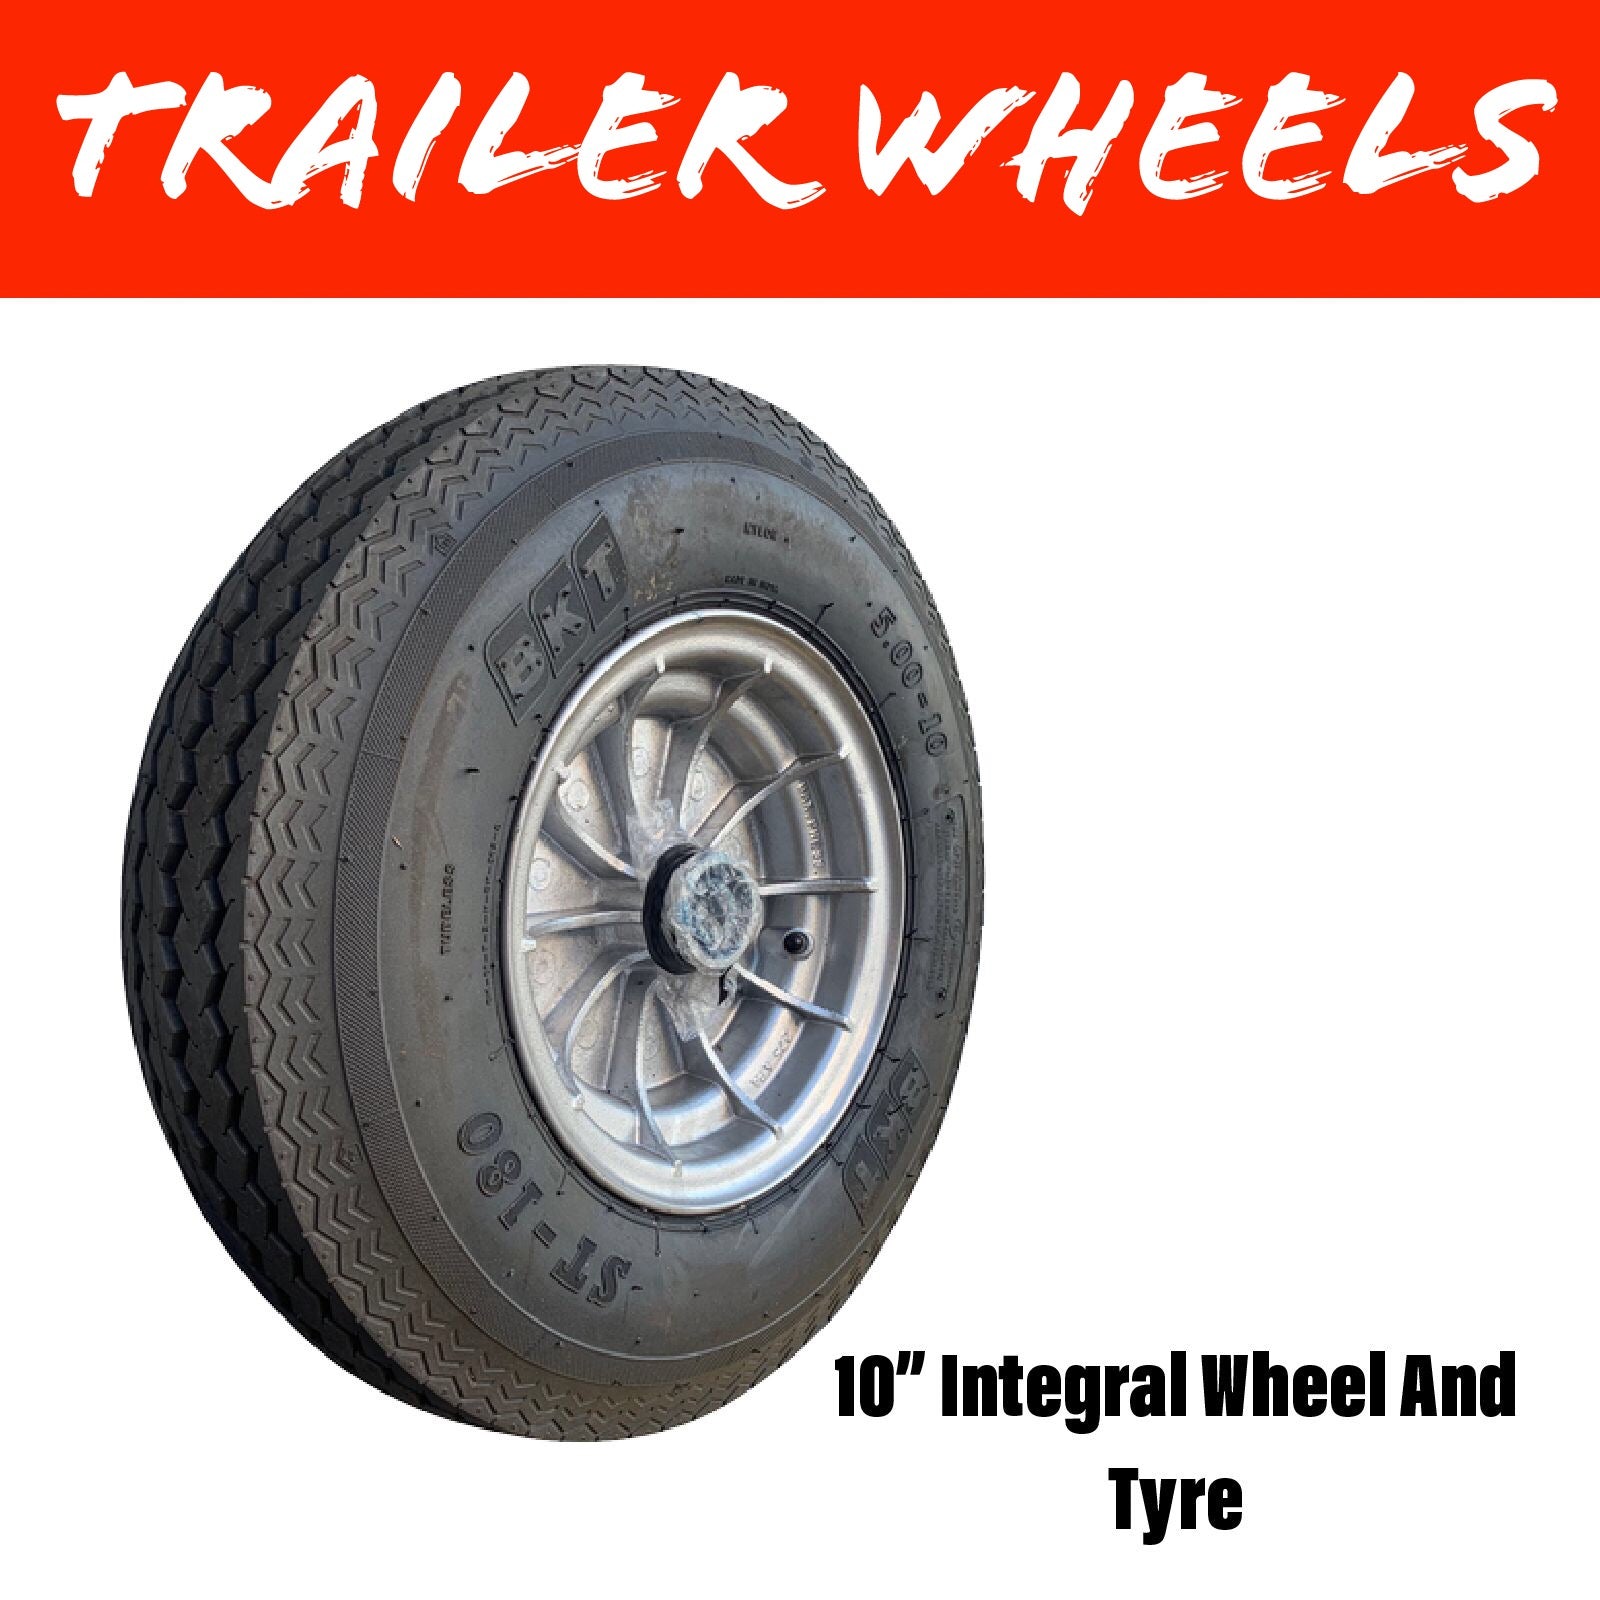 10 INCH INTEGRAL Wheel and Tyre